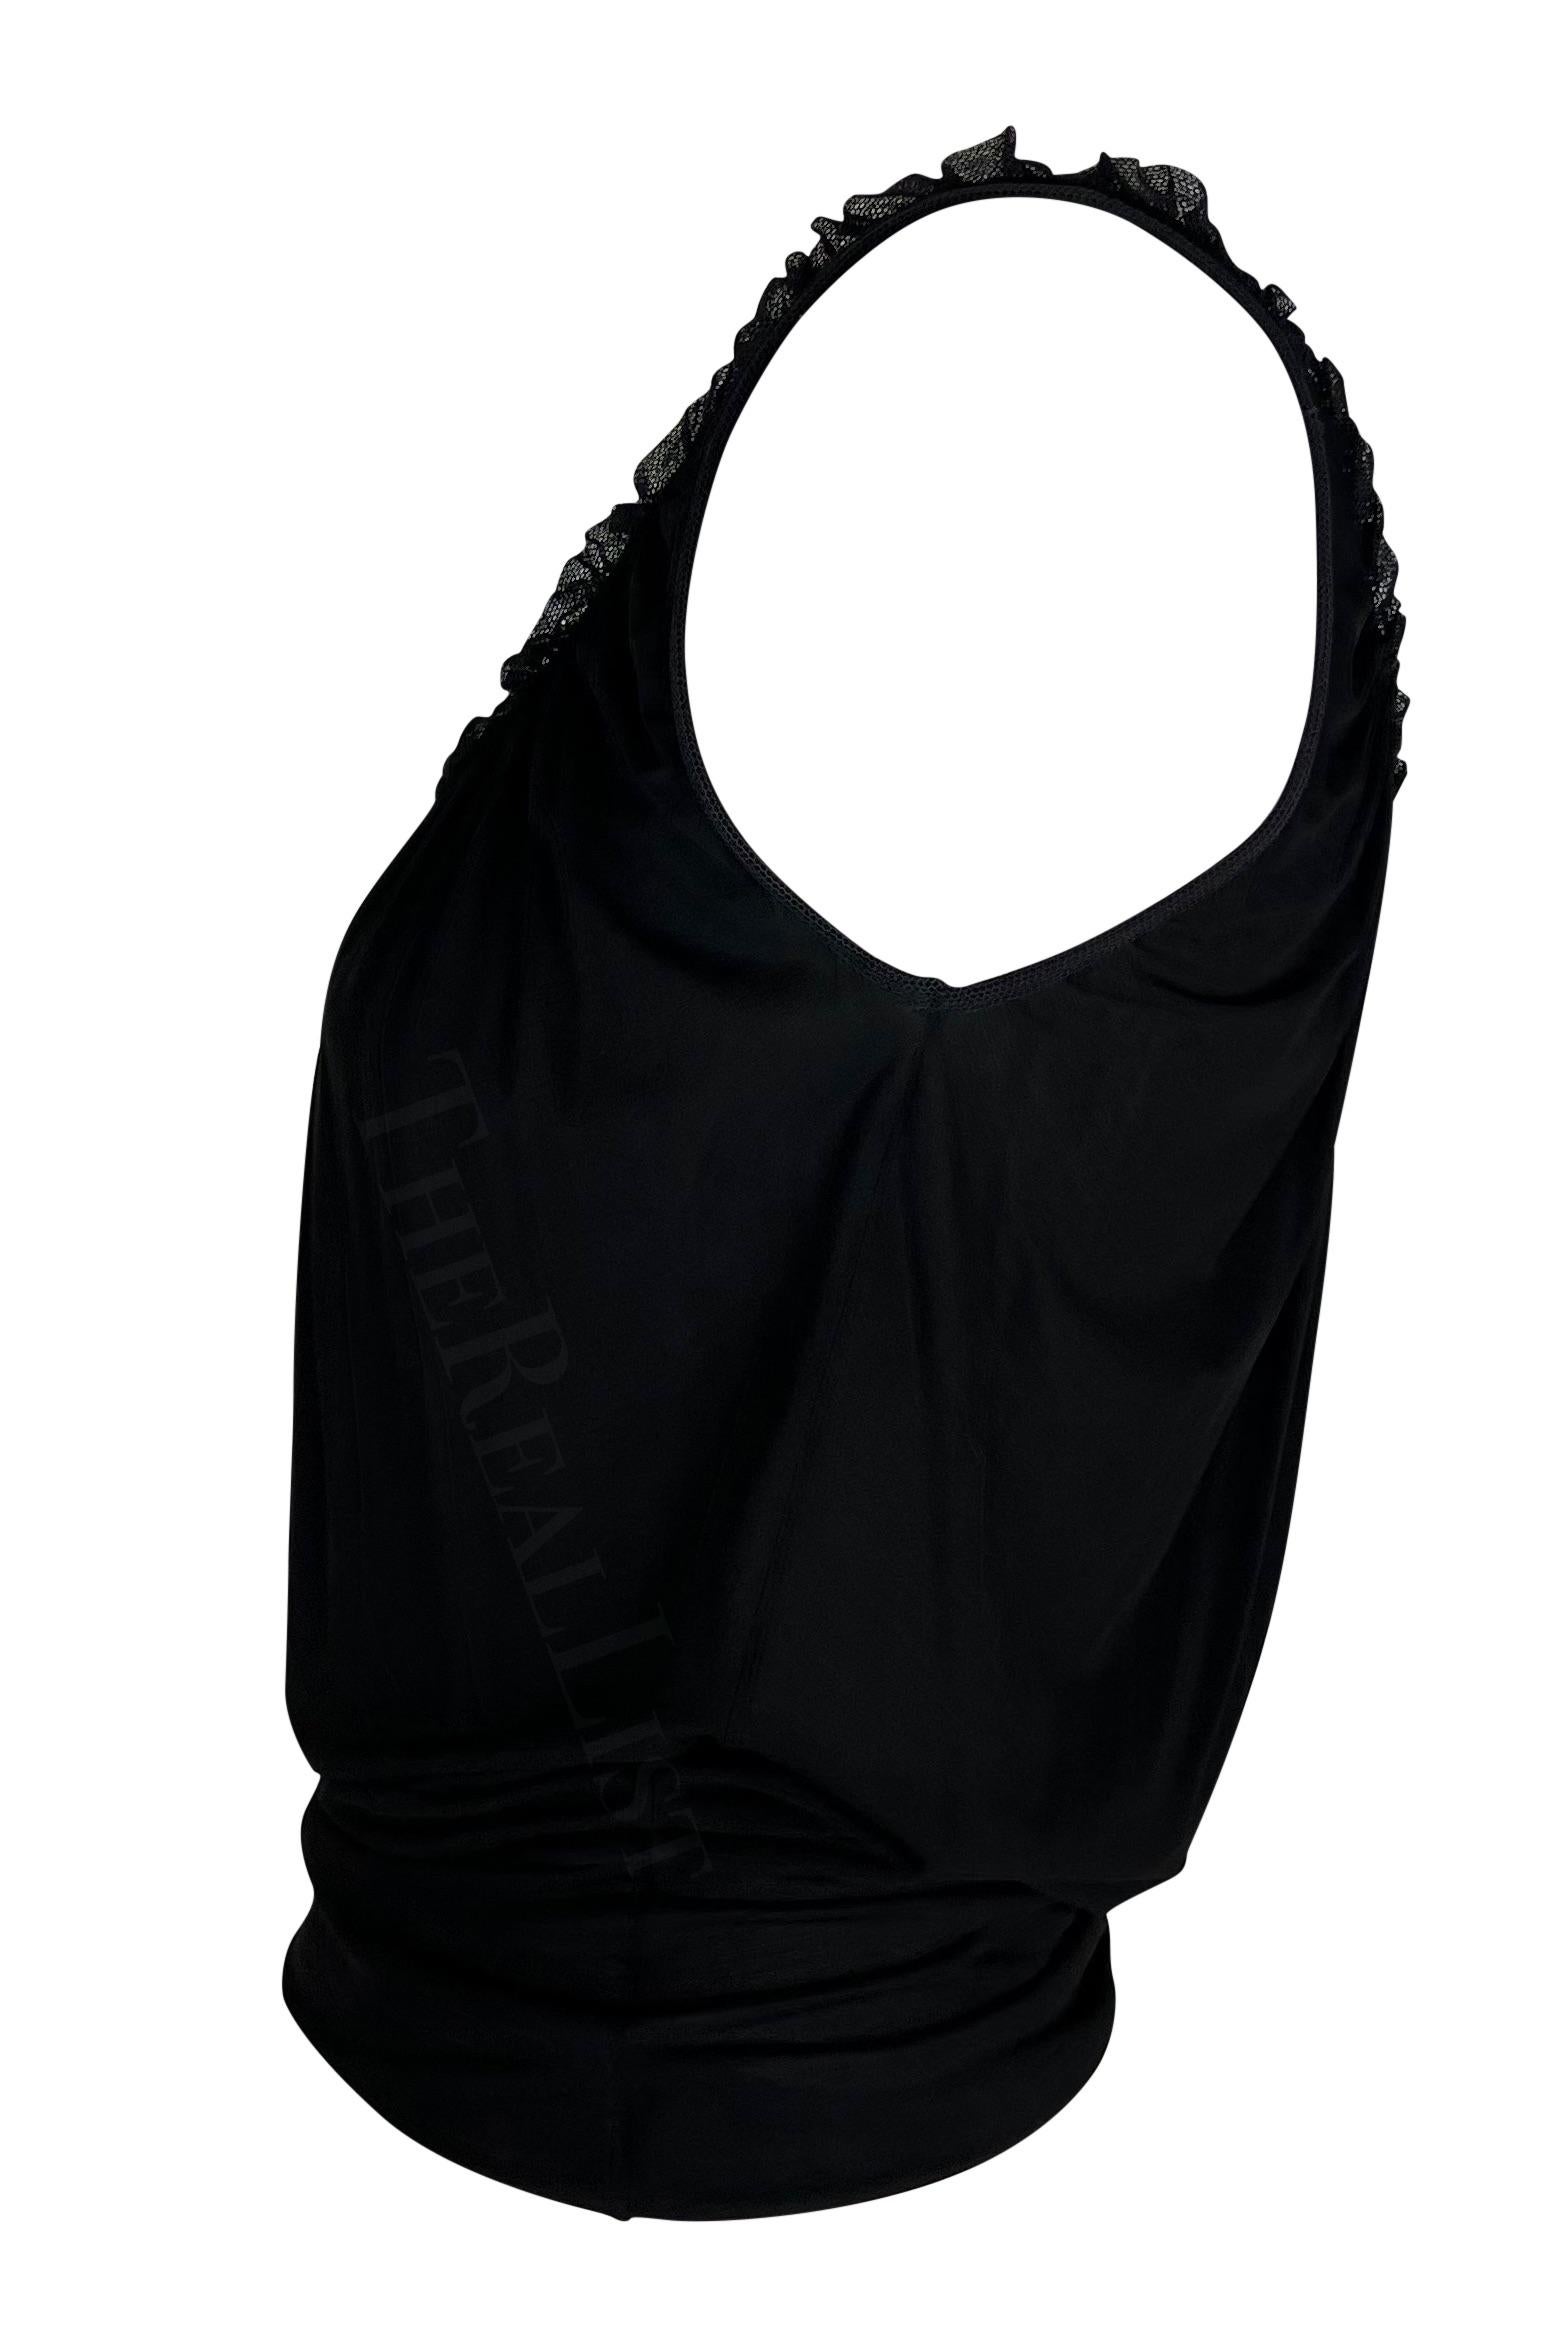 2000s Gucci by Tom Ford Black Ruffle Bodycon Stretch Tank Top In Excellent Condition For Sale In West Hollywood, CA